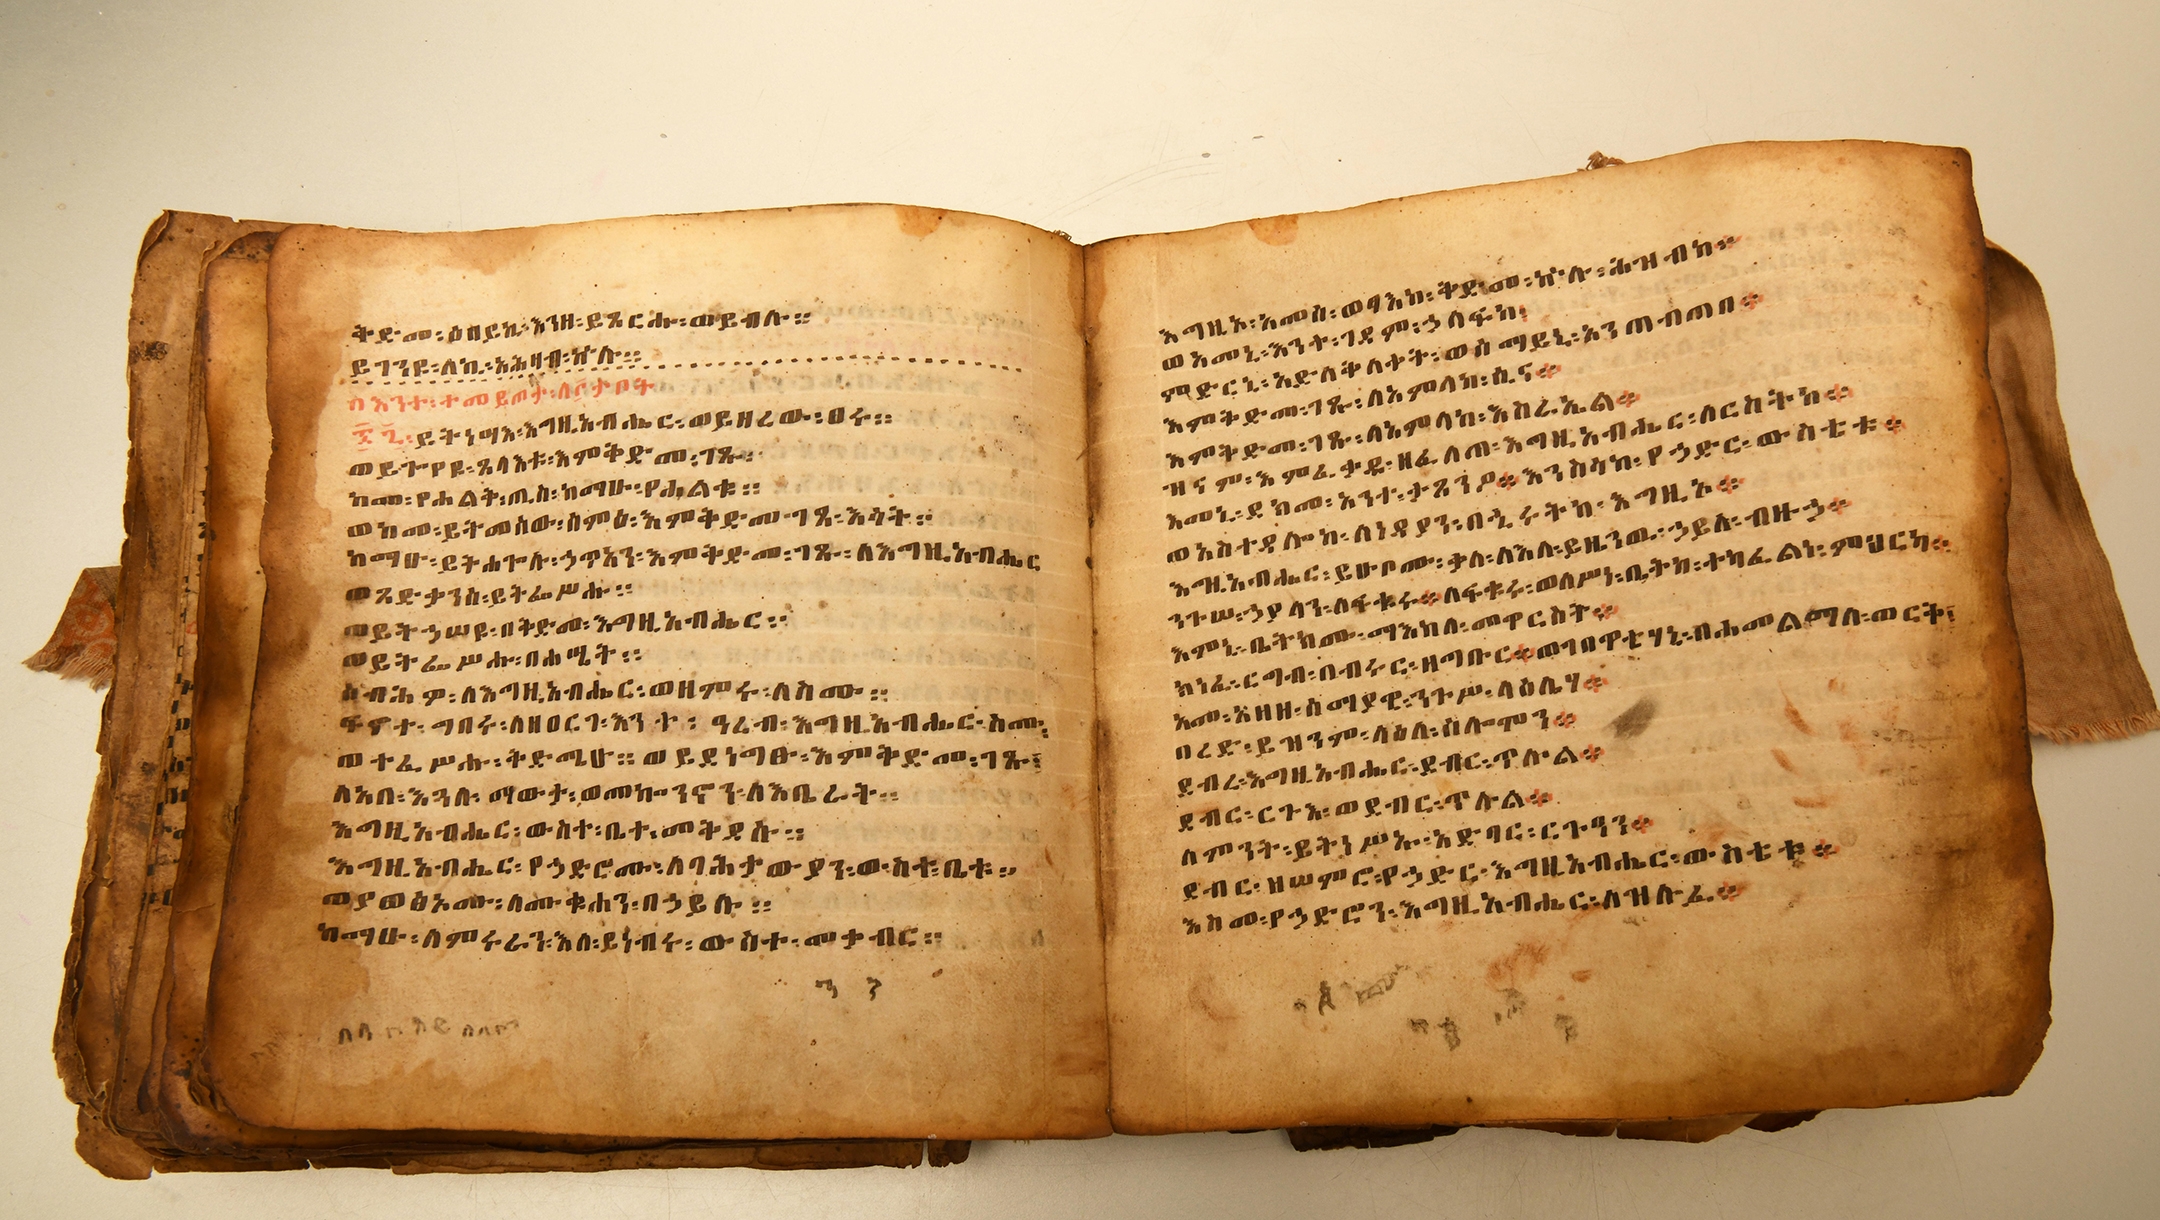 The Orit is a rare Ethiopian version of the Bible. This Israeli family risked it all to retrieve one.